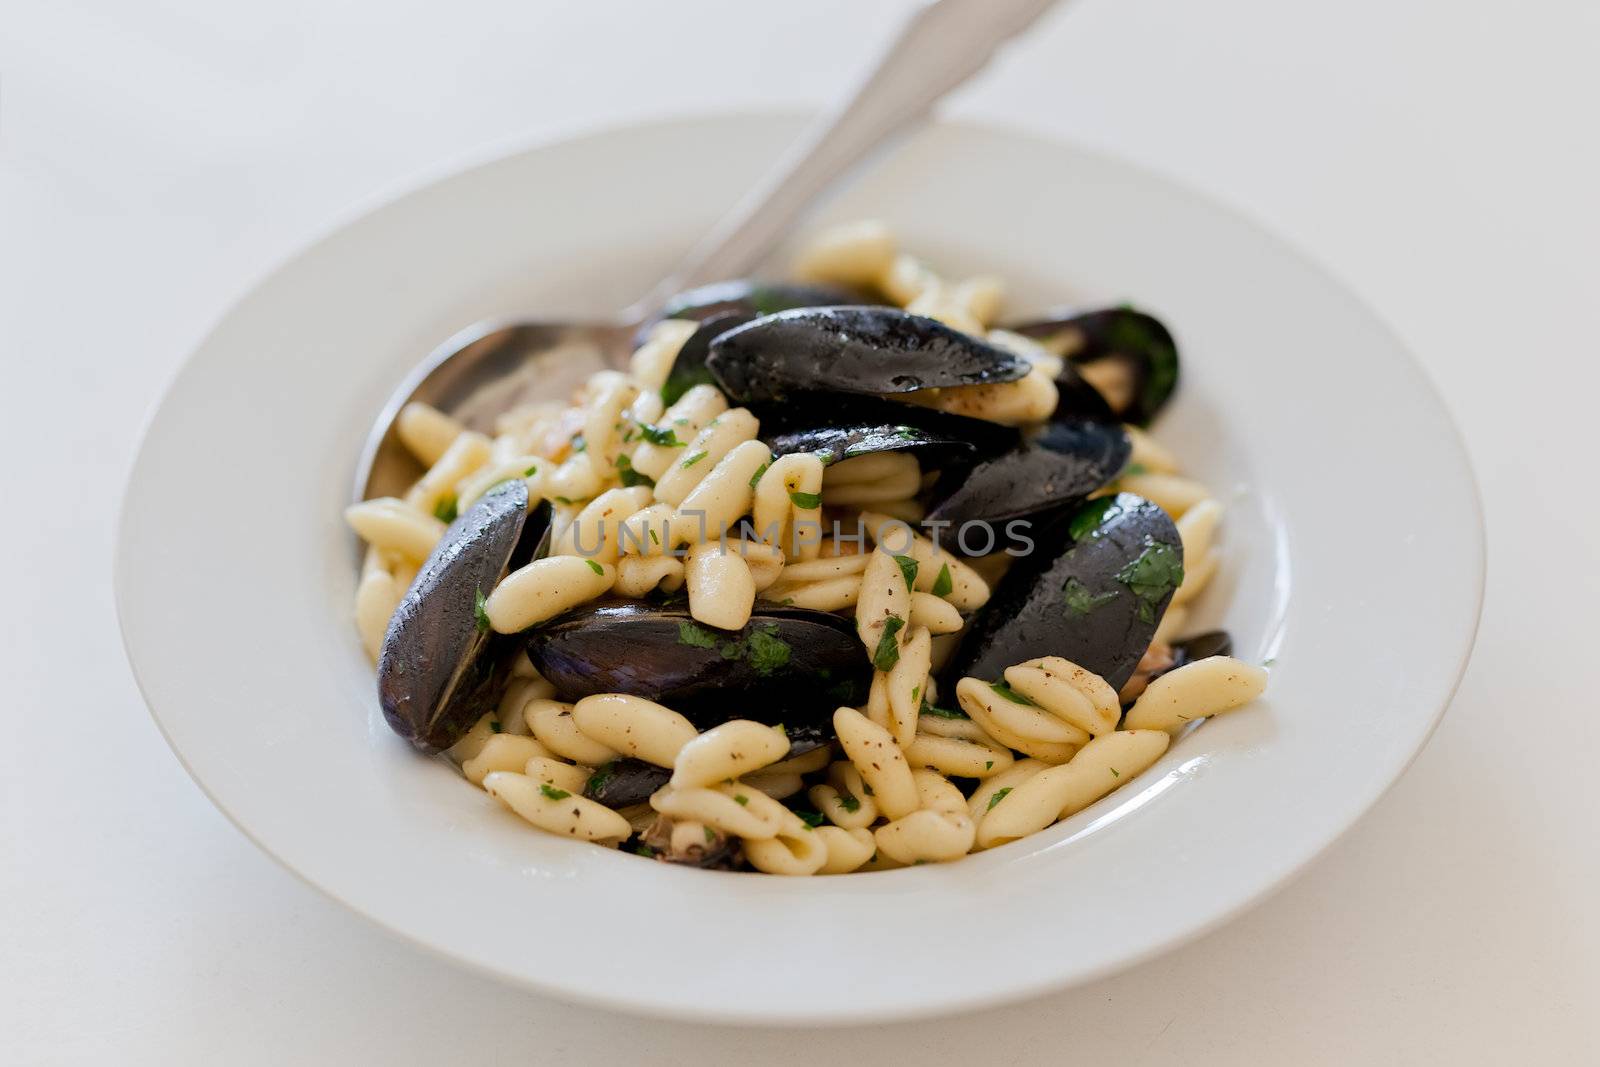 an italian dish with pasta (cavatelli) and mussels